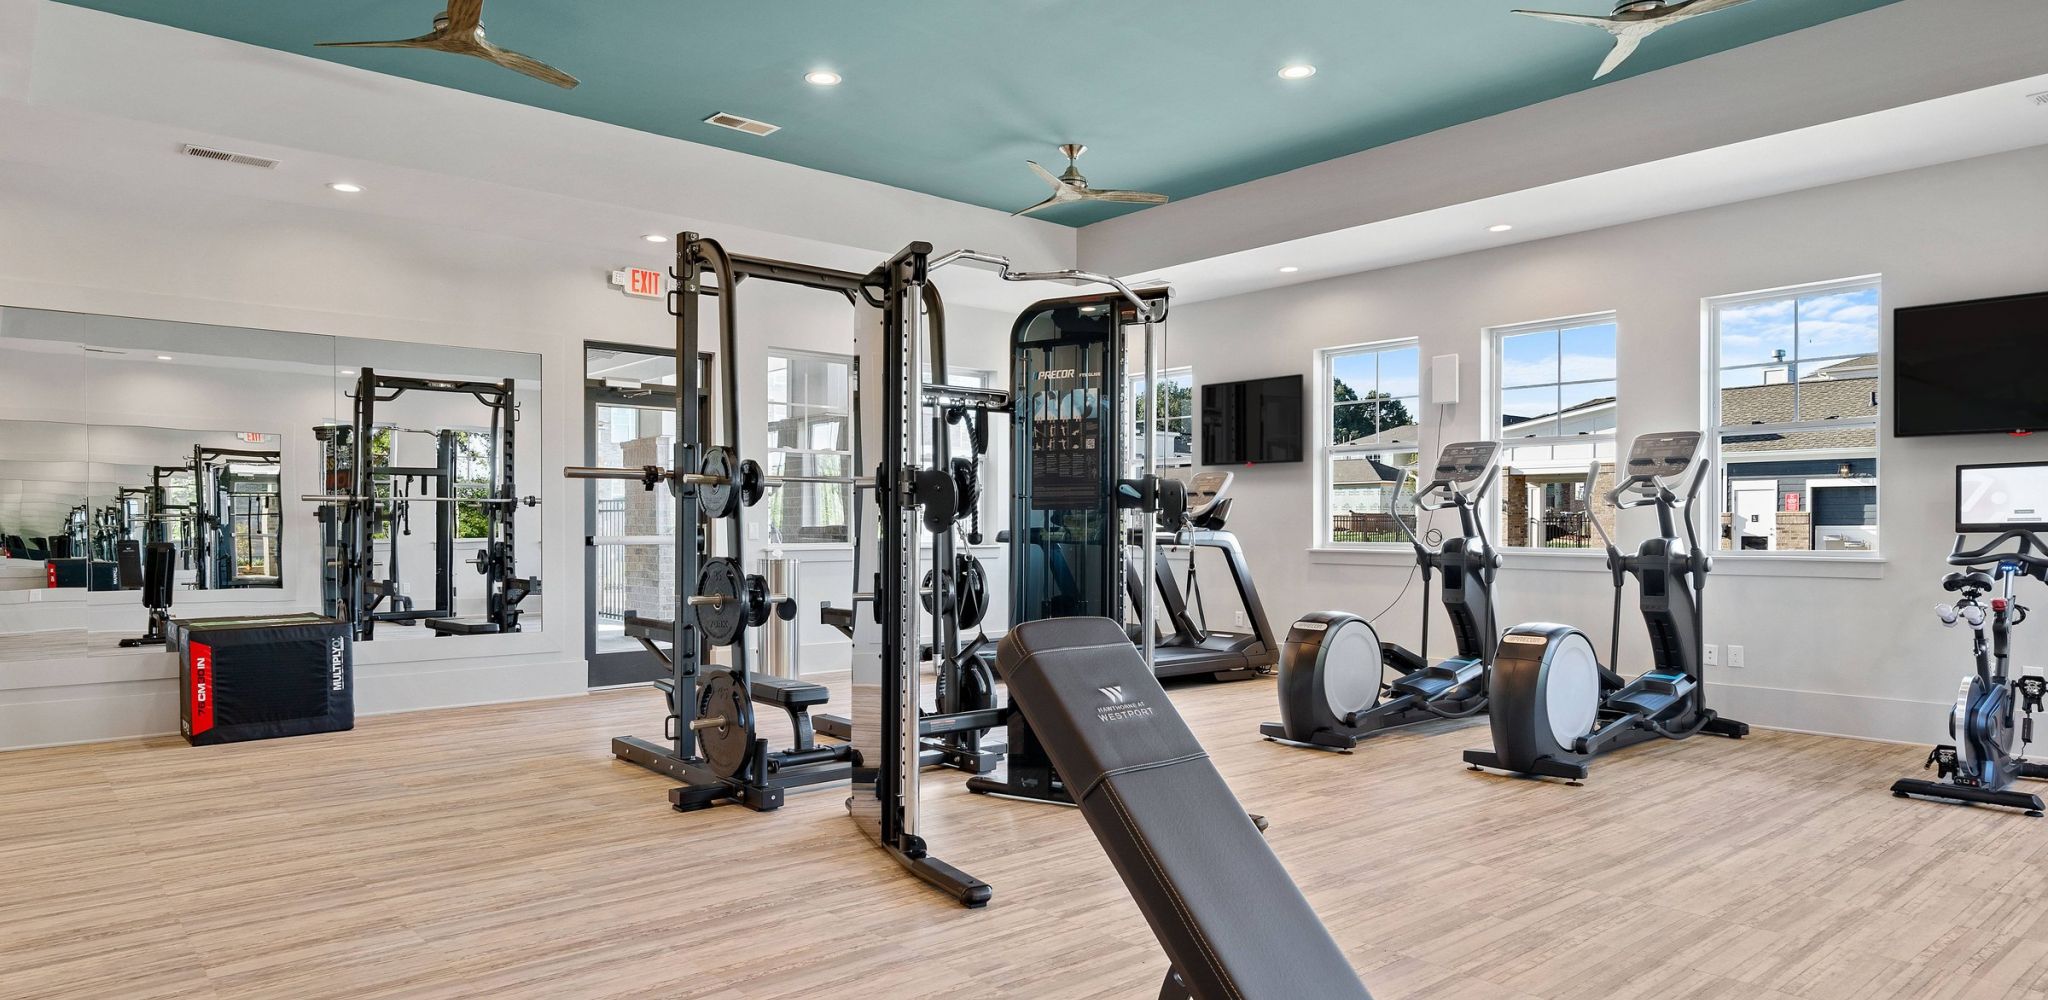 Hawthorne at Westport fitness center with cardio machines and weight racks